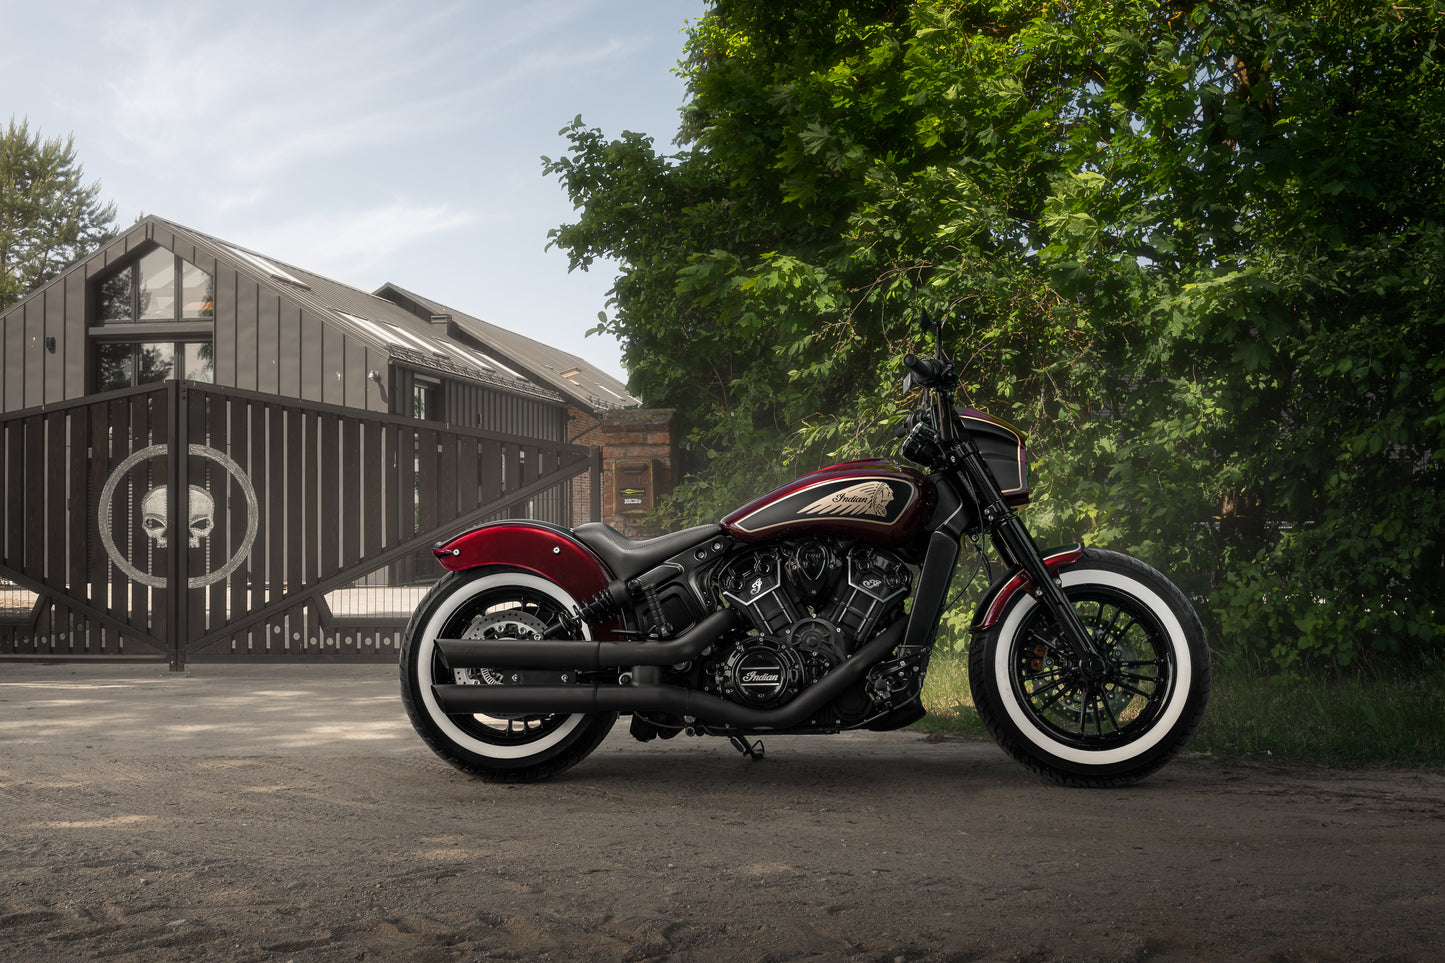 Harley Davidson motorcycle with Killer Custom "Apache II" rear fender from the side outside on a sunny day with some trees and a building in the background